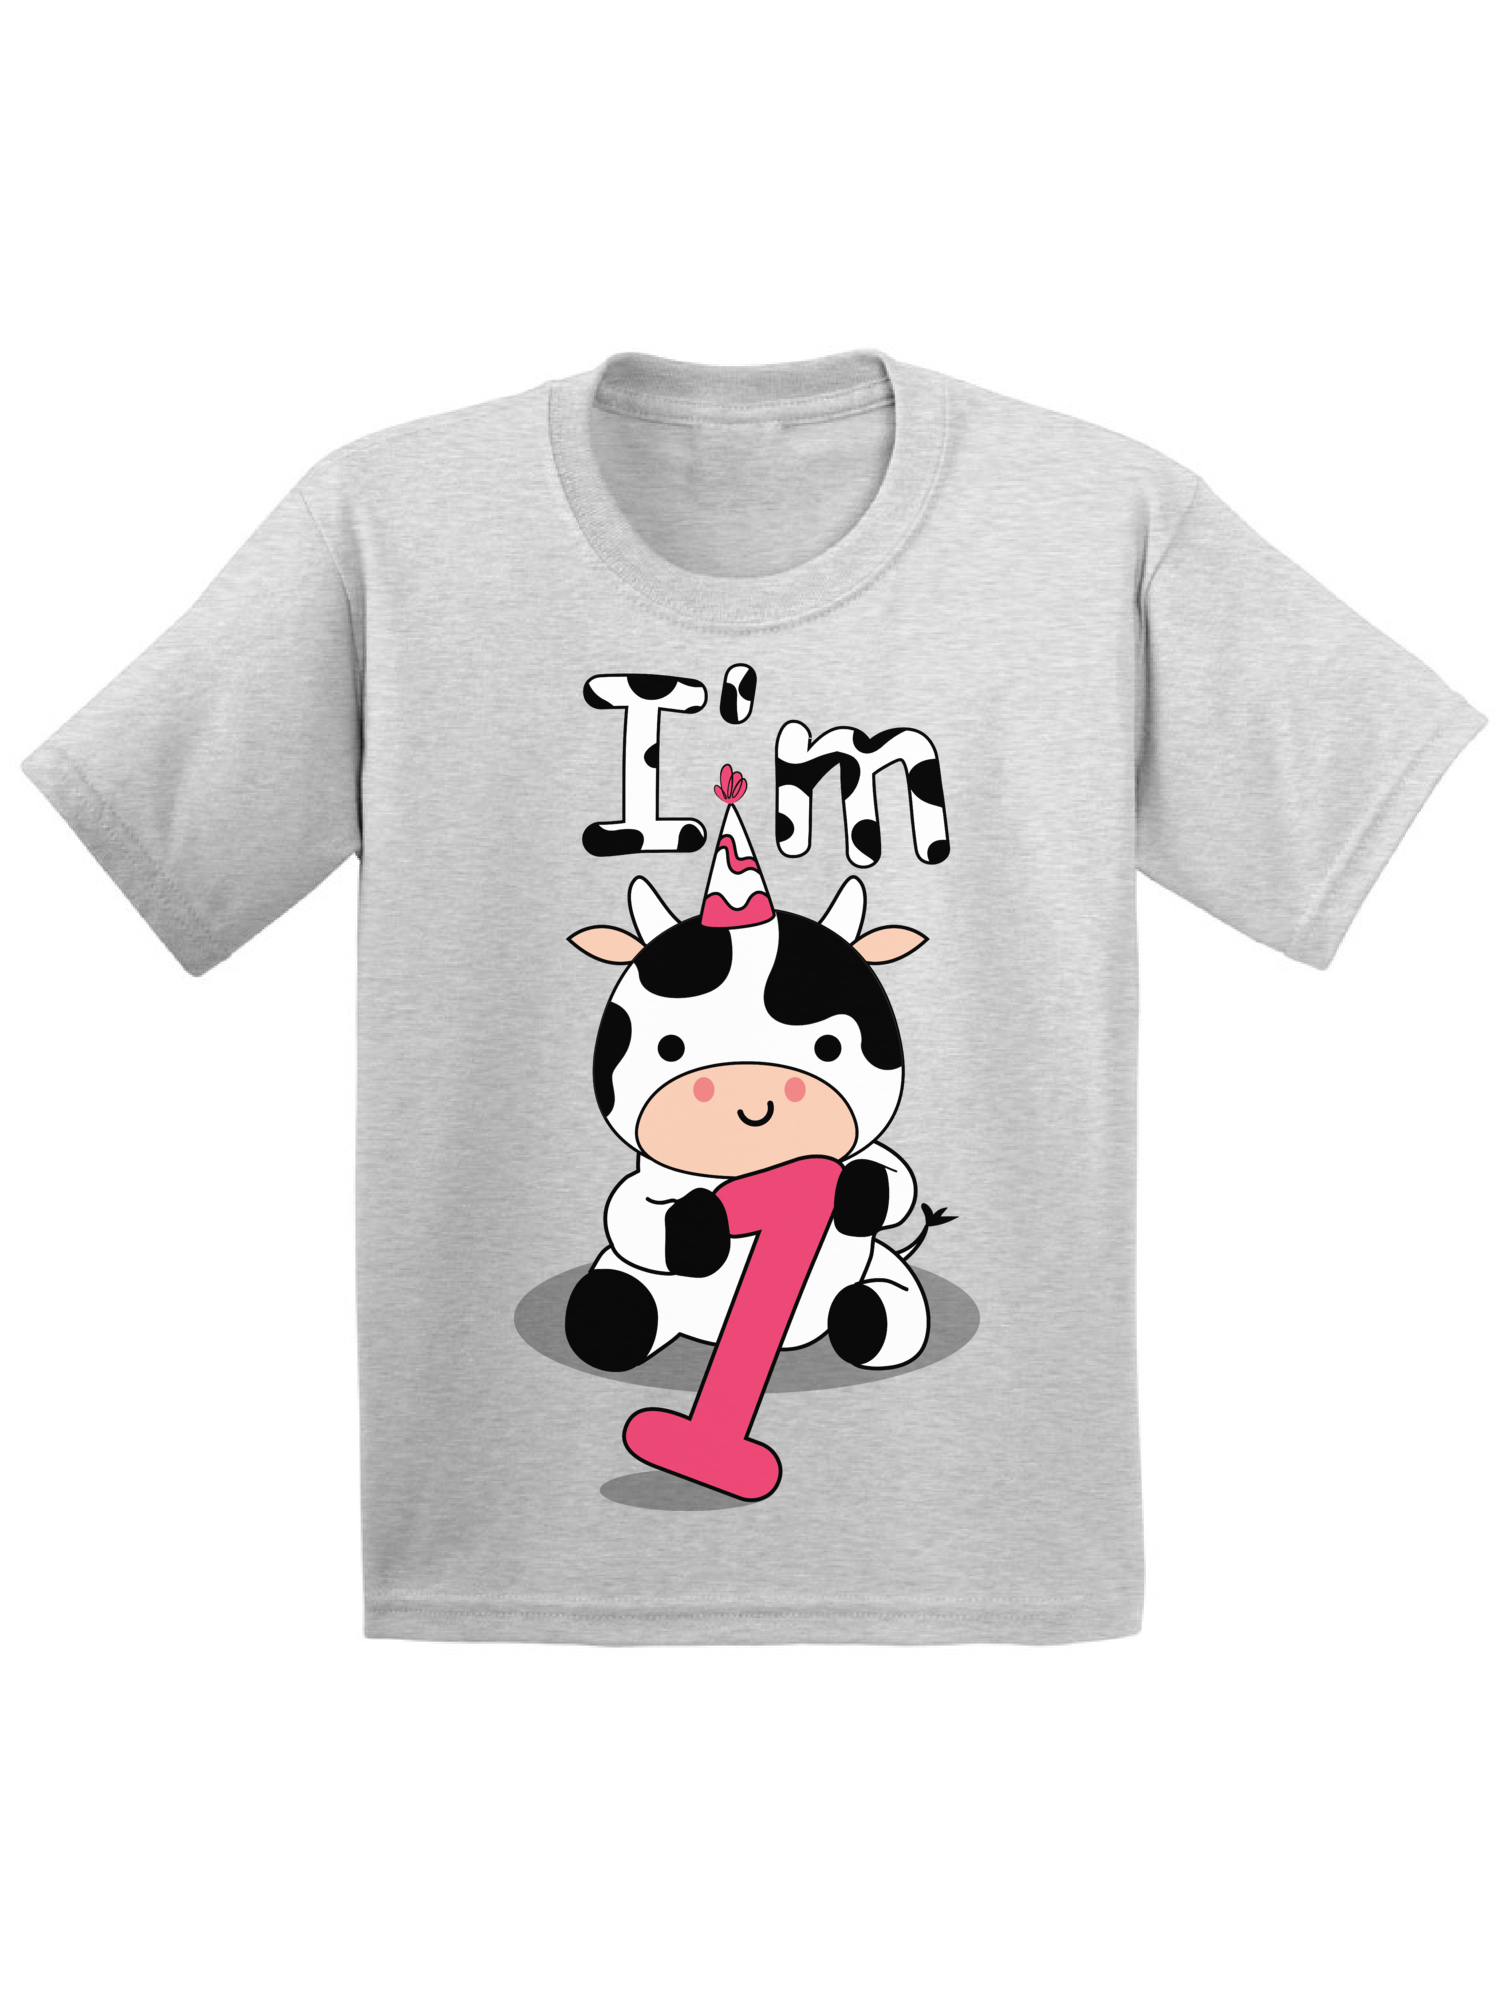 Birthday Infant Shirt Cow One Infant T Shirt 1 Year Old Baby Boy Clothes 6M Baby Shirts 12M Shirt Cute Cow 18M Baby Girl Shirt 24M Baby Outfits I'm One Year Old Shirt for 1 Year Old Kids - image 1 of 4